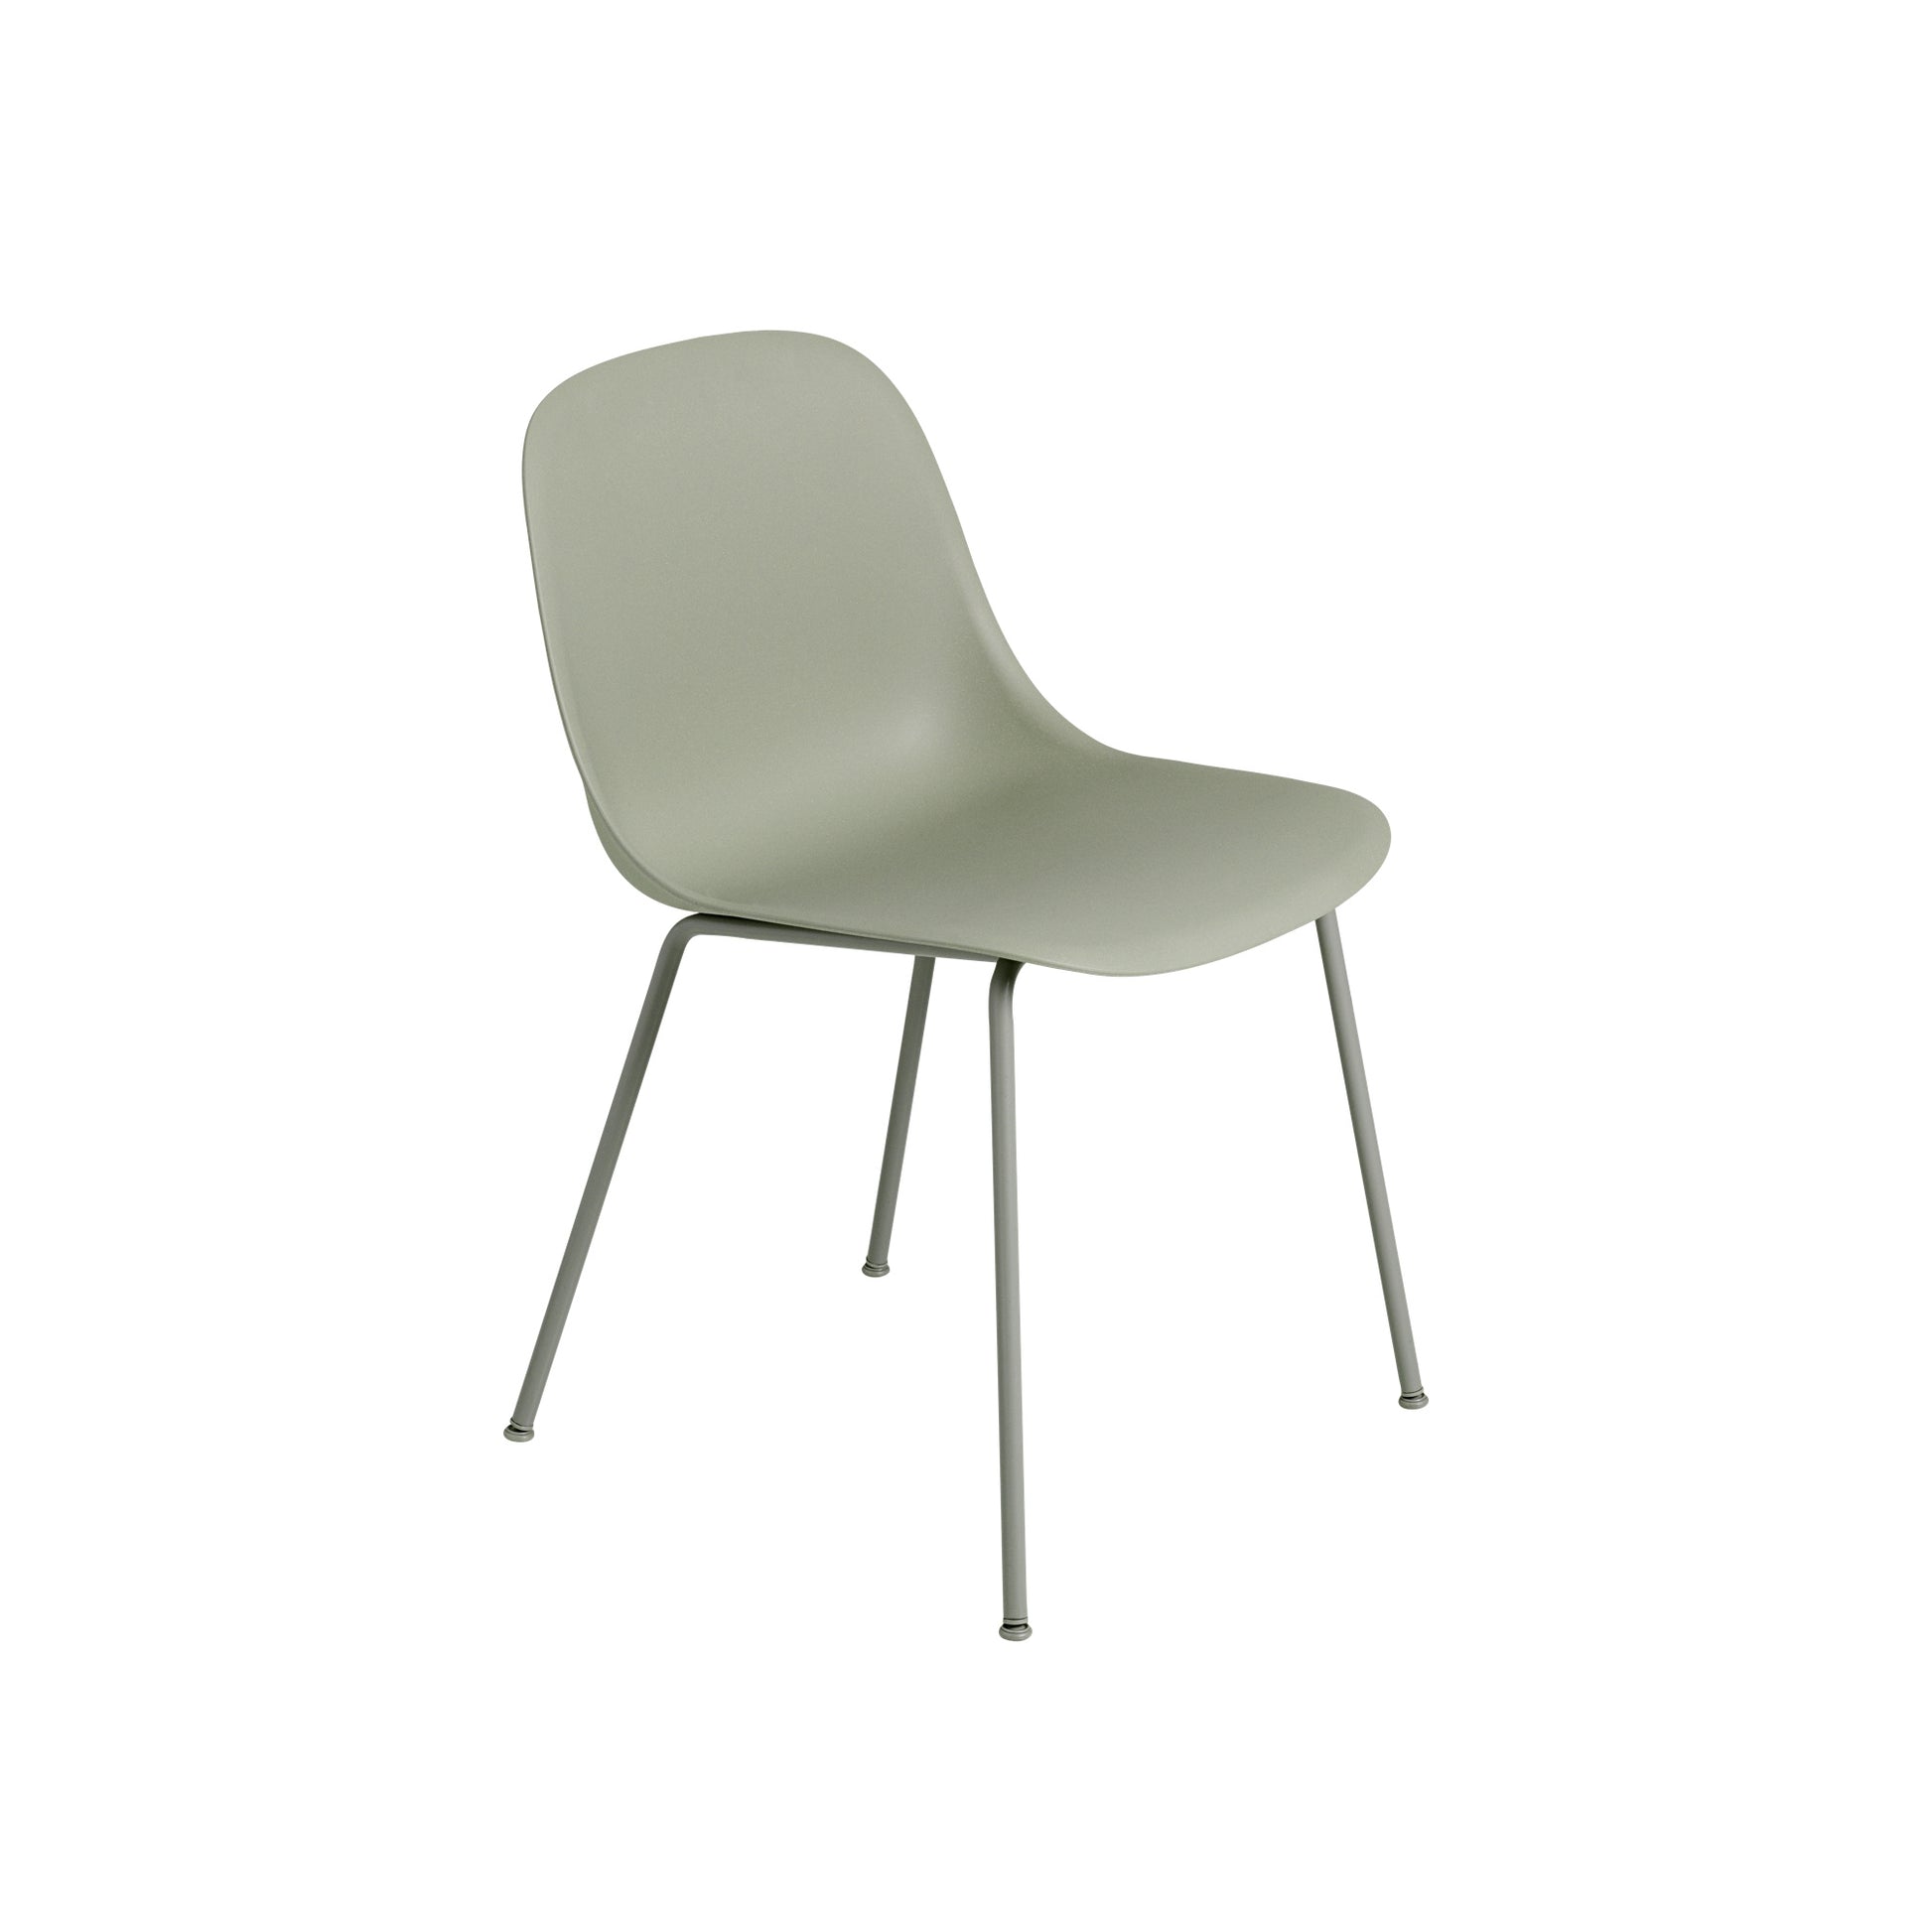 Fiber Dining Chair w. Tube Base by Muuto #Dusty green